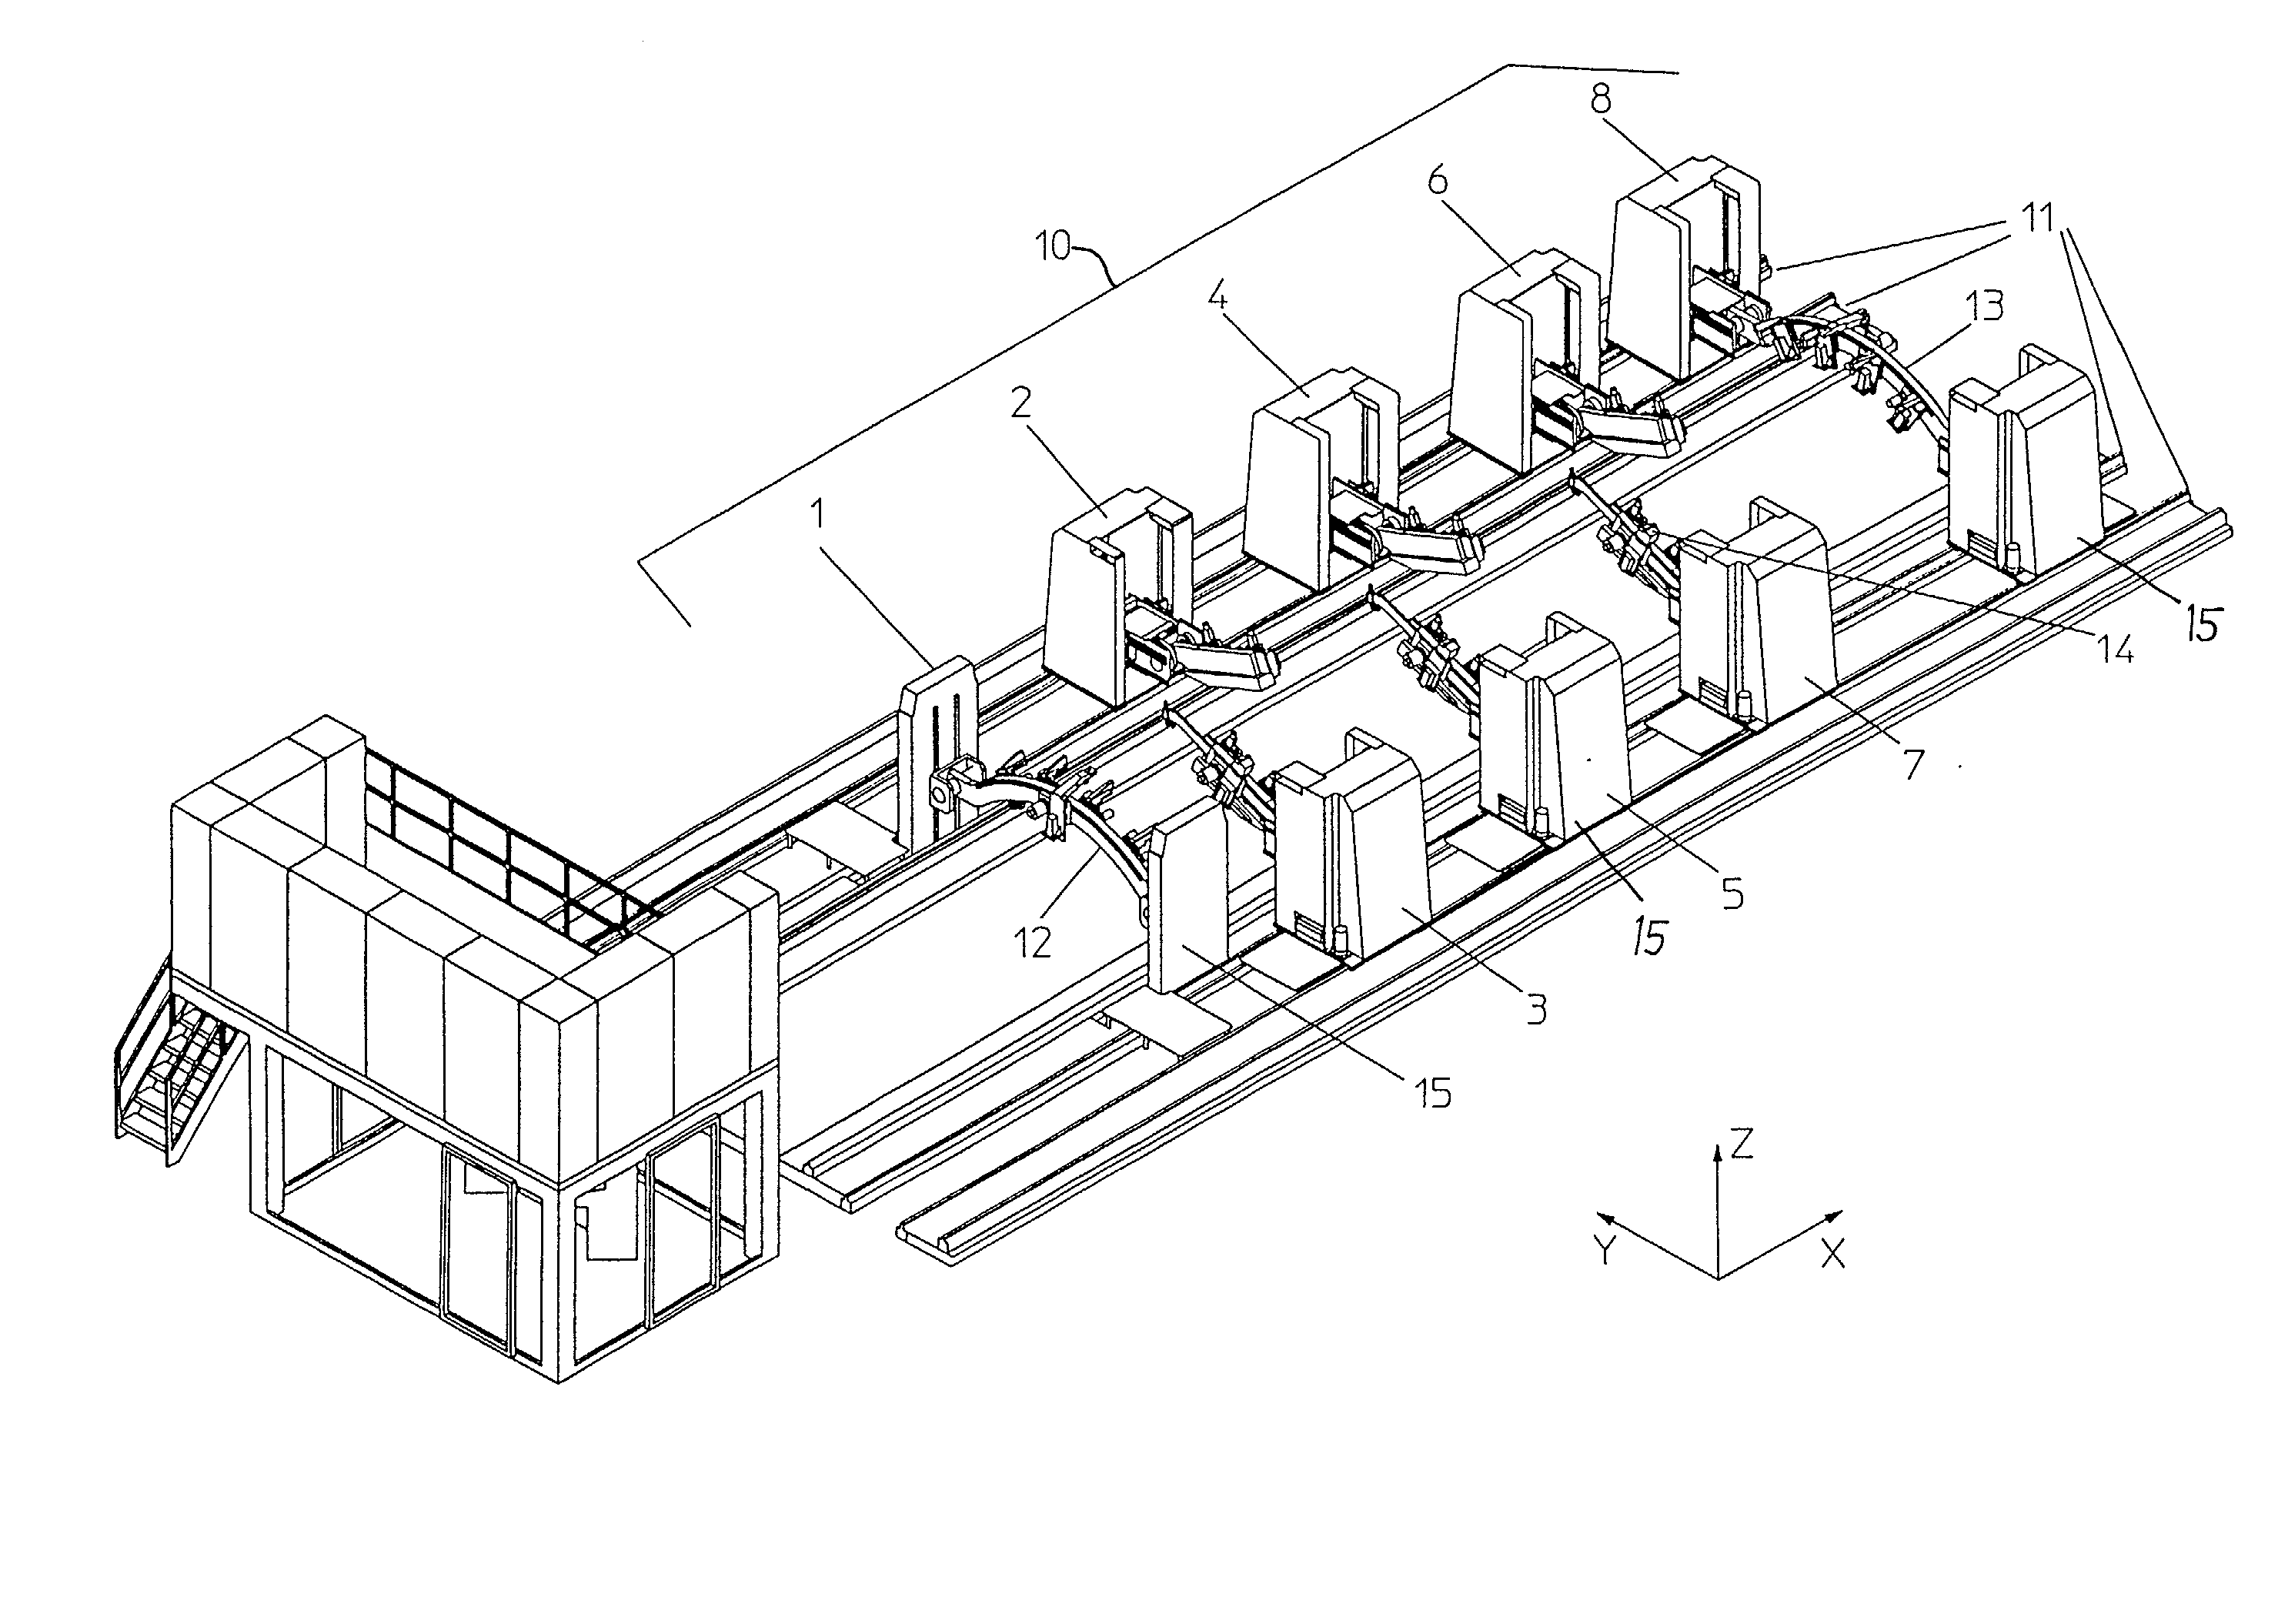 Versatile adaptable holding apparatus for holding large format workpieces